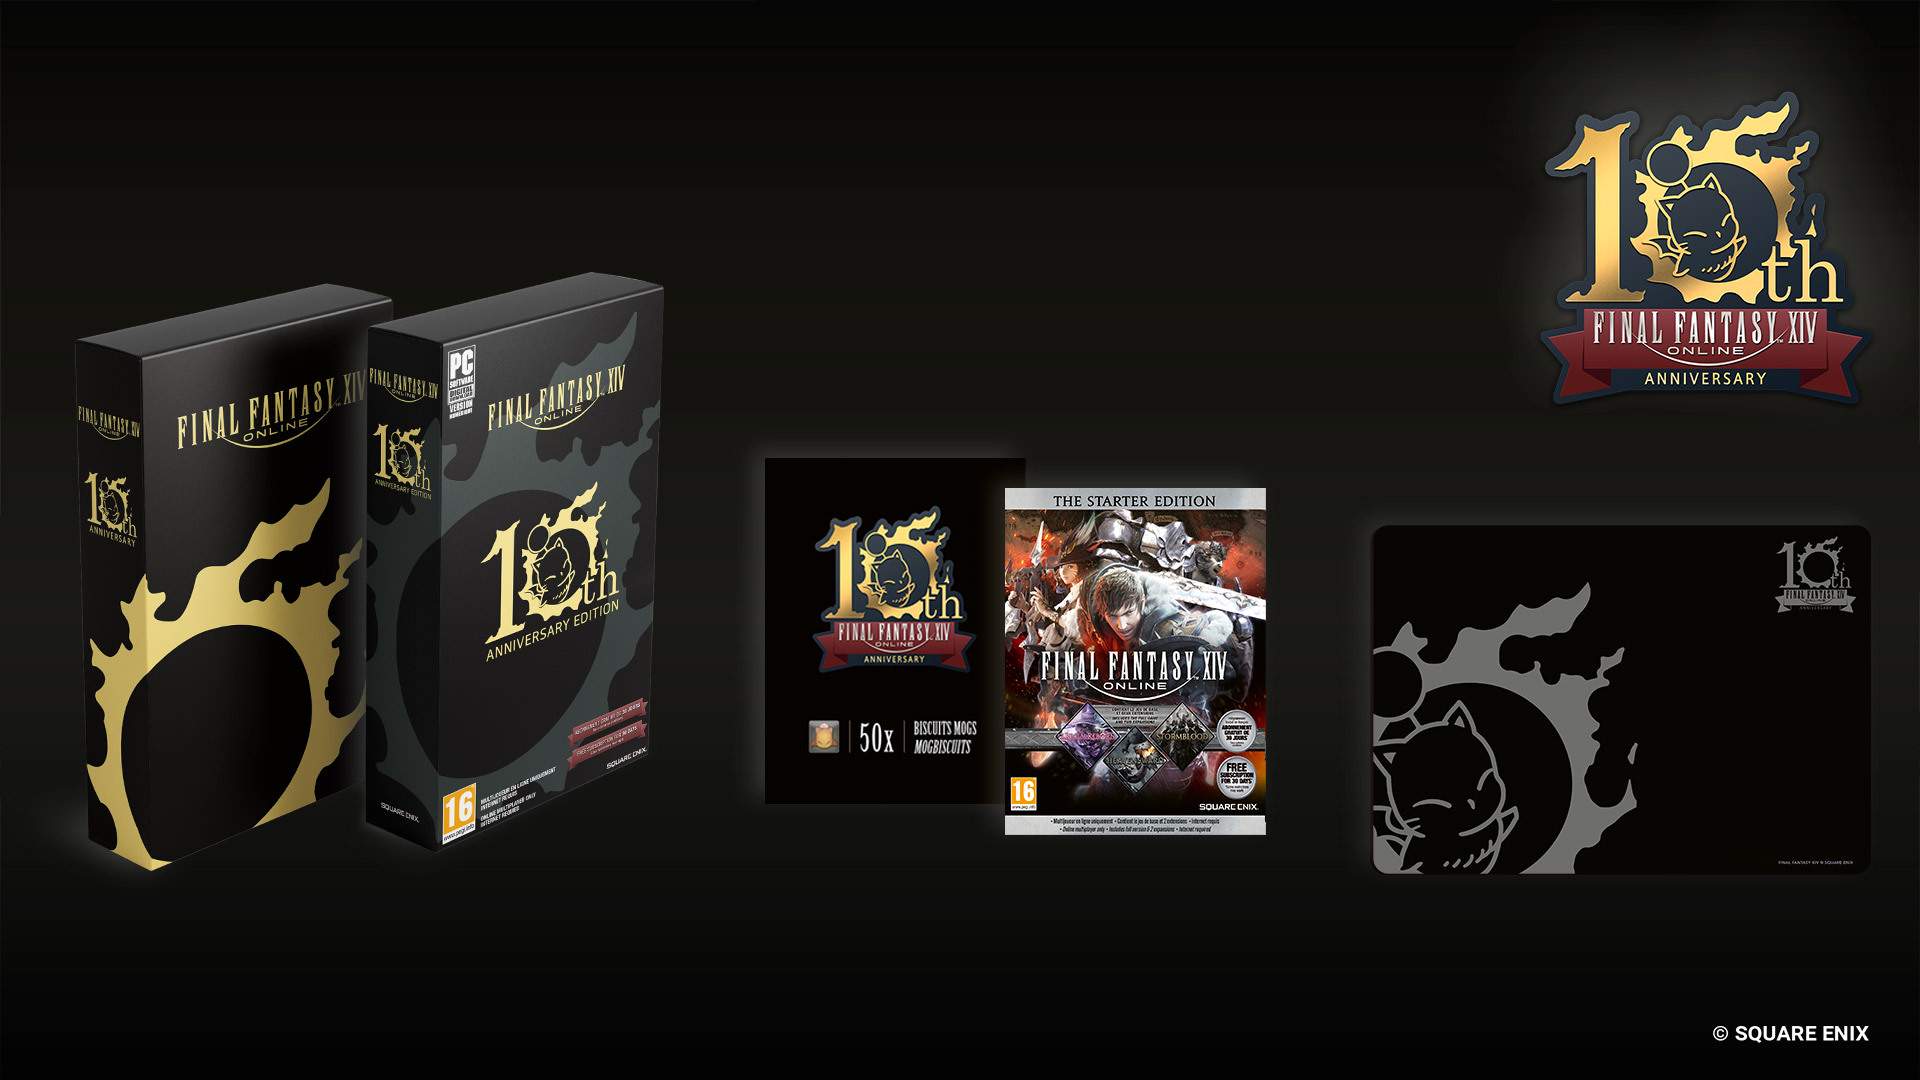 Image shows items in FF14 10th Anniversary Edition: mouse pad, art box, Starter Edition, ingame code